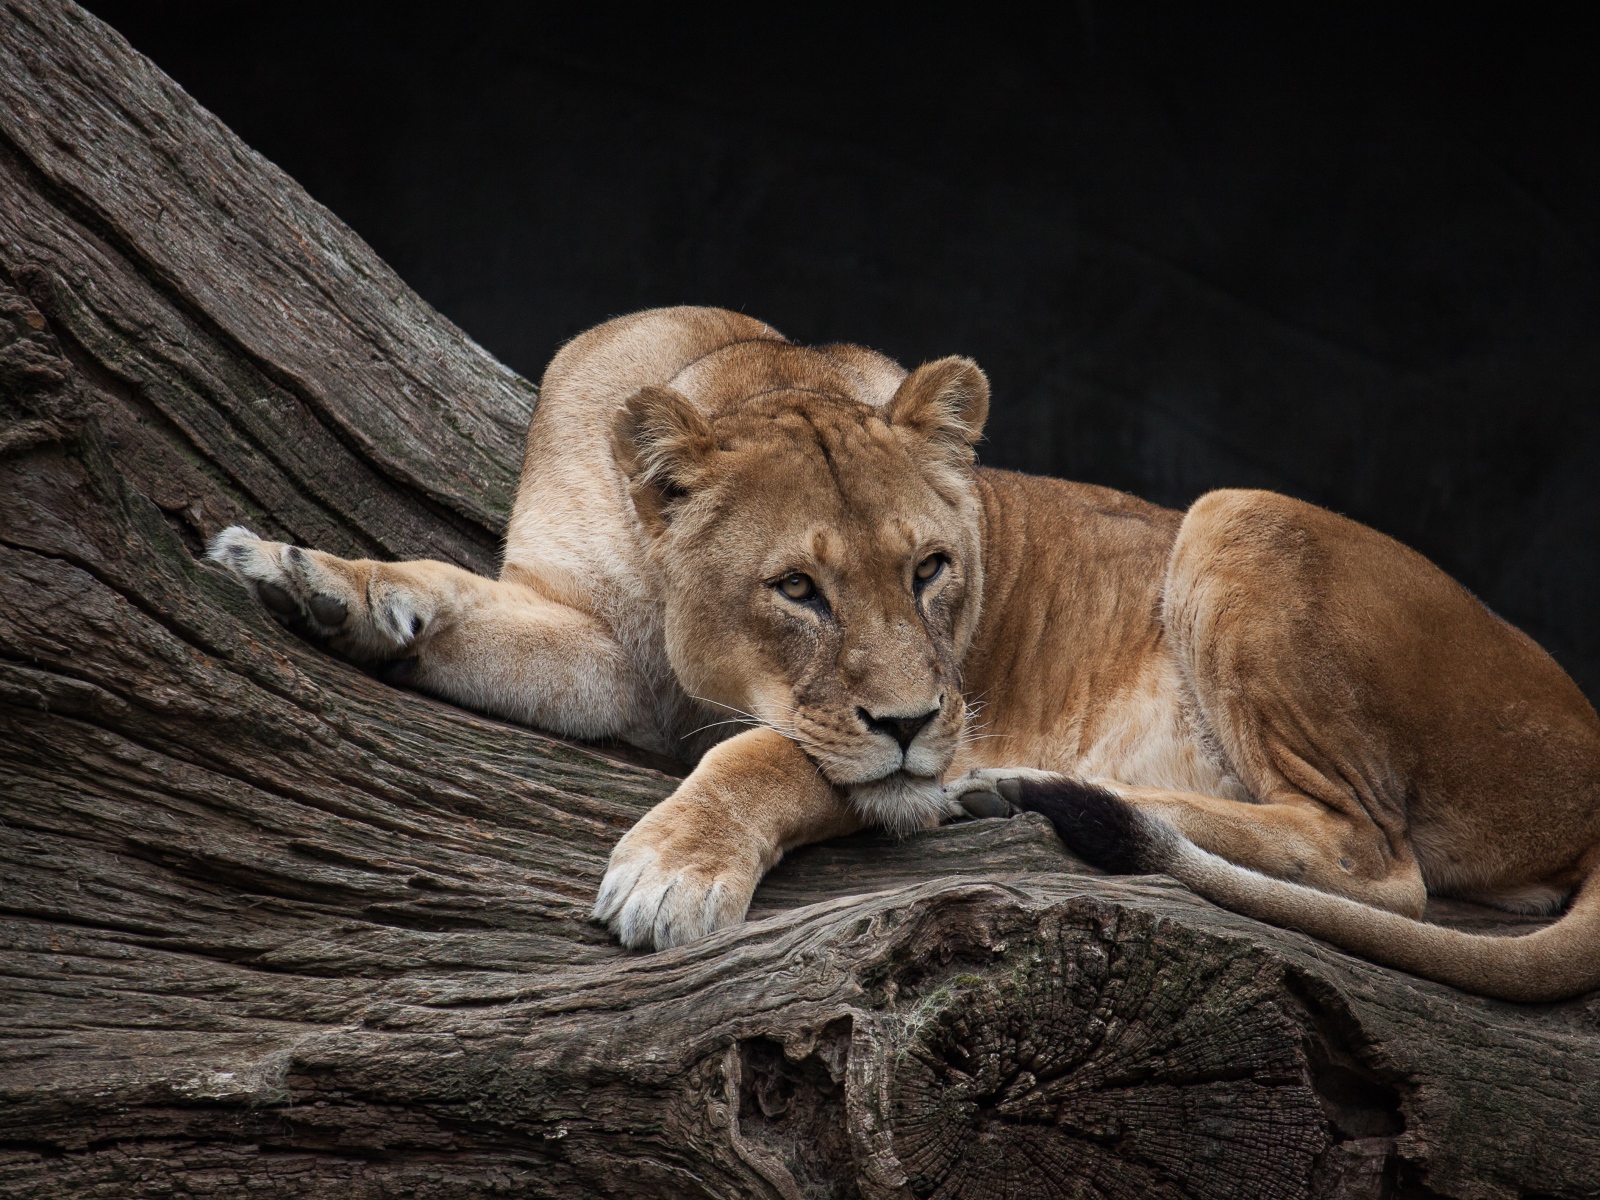 The big lioness lies on a dry tree in the zoo